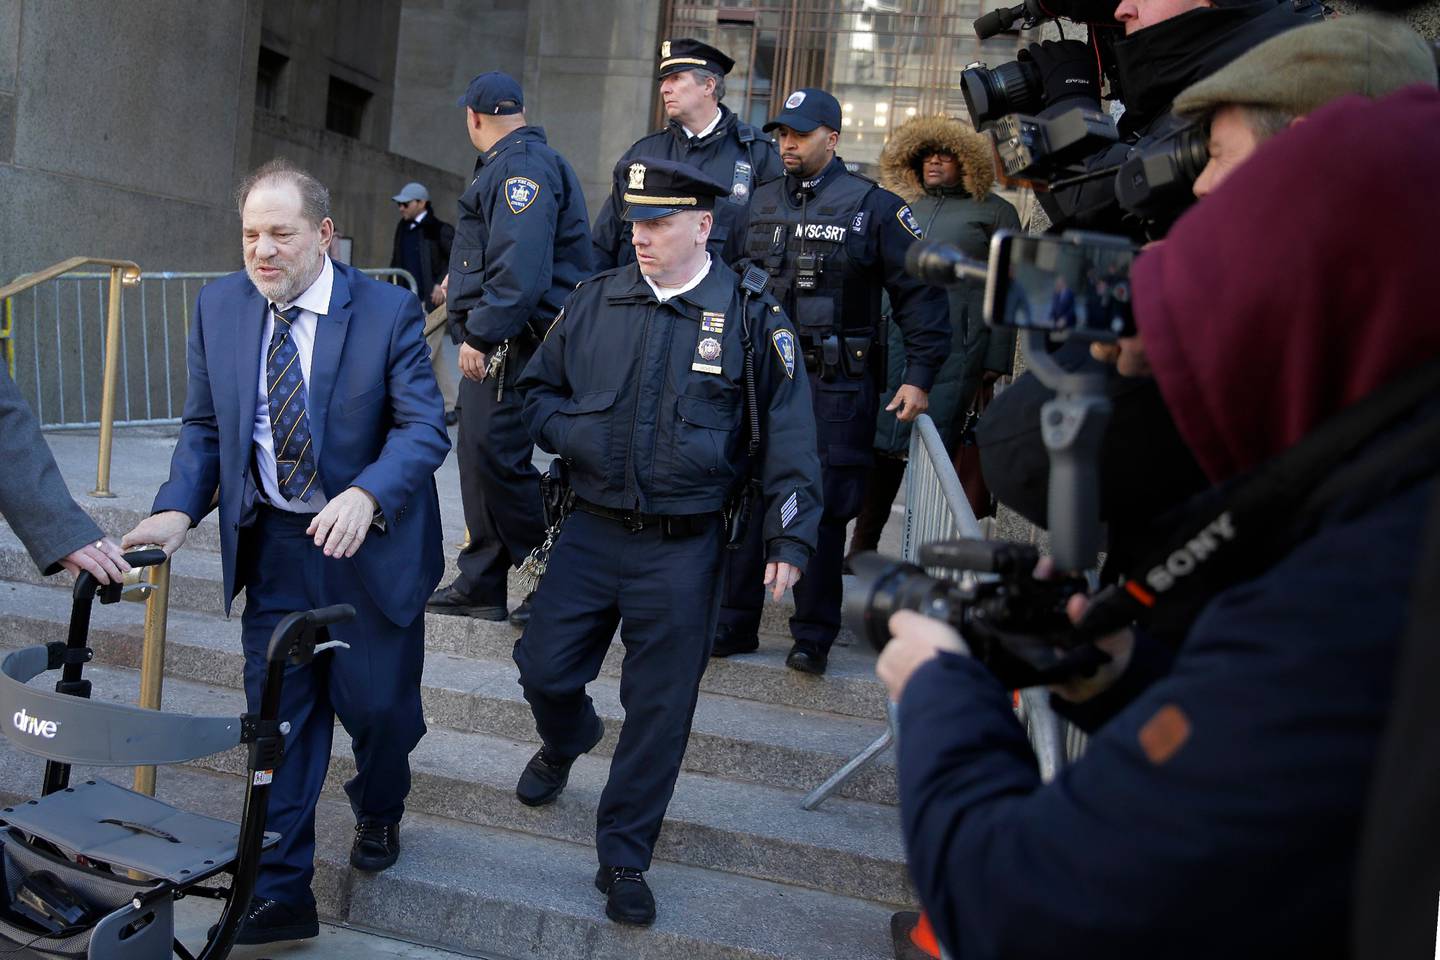 Harvey Weinstein, left, leaves a Manhattan courthouse after closing arguments in his rape trial in New York, Friday, Feb. 14, 2020. (AP Photo/Seth Wenig)